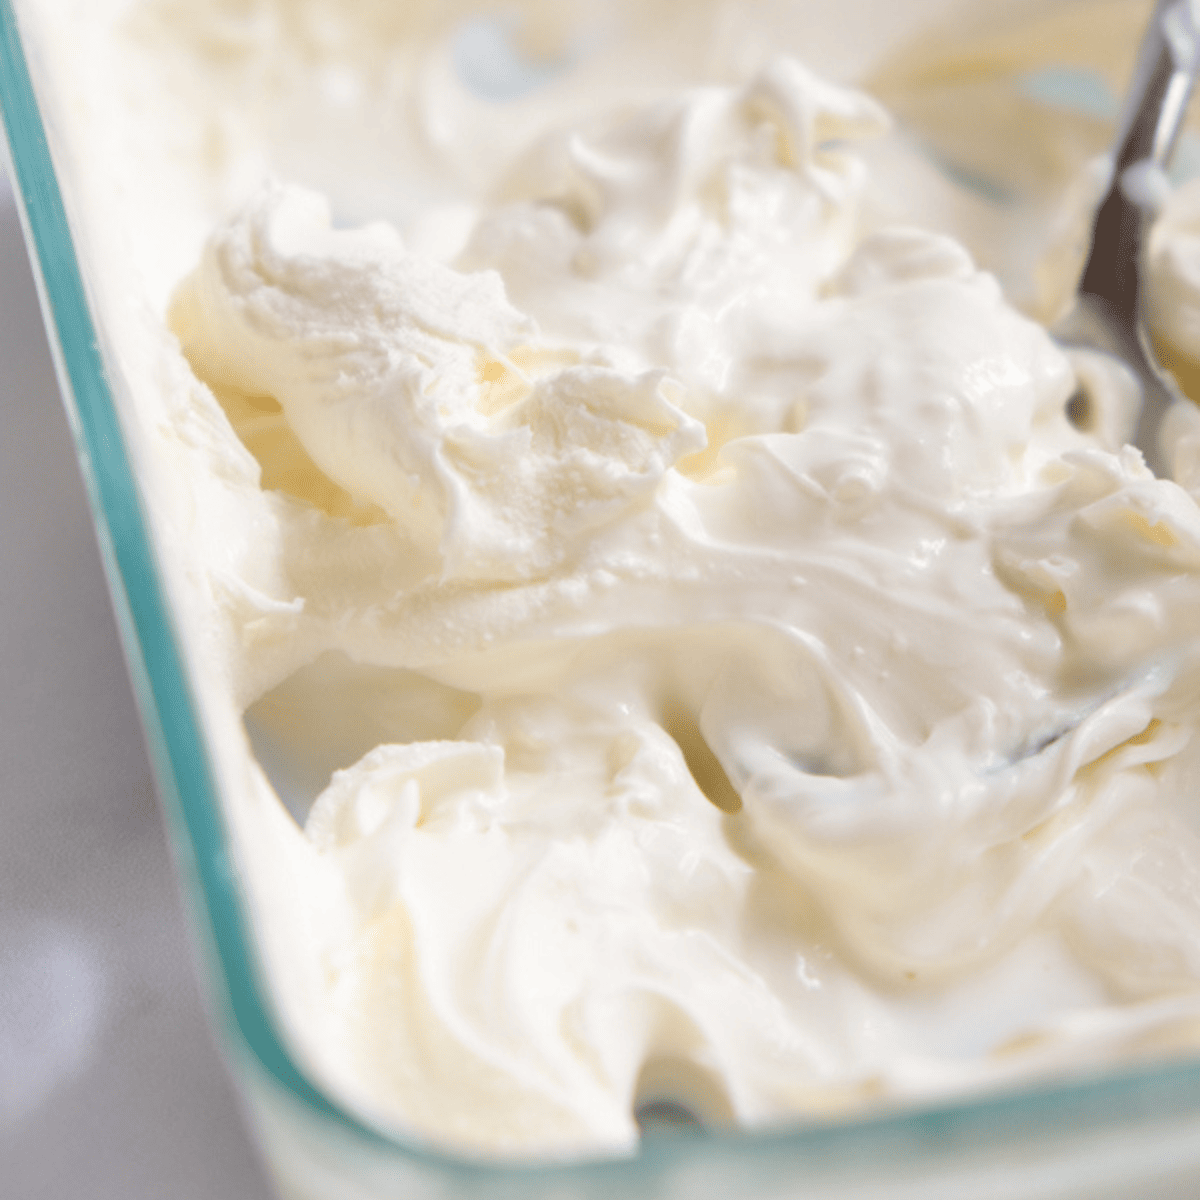 Easy Clotted Cream Recipe (What Works...and What Doesn't!) - International Desserts Blog